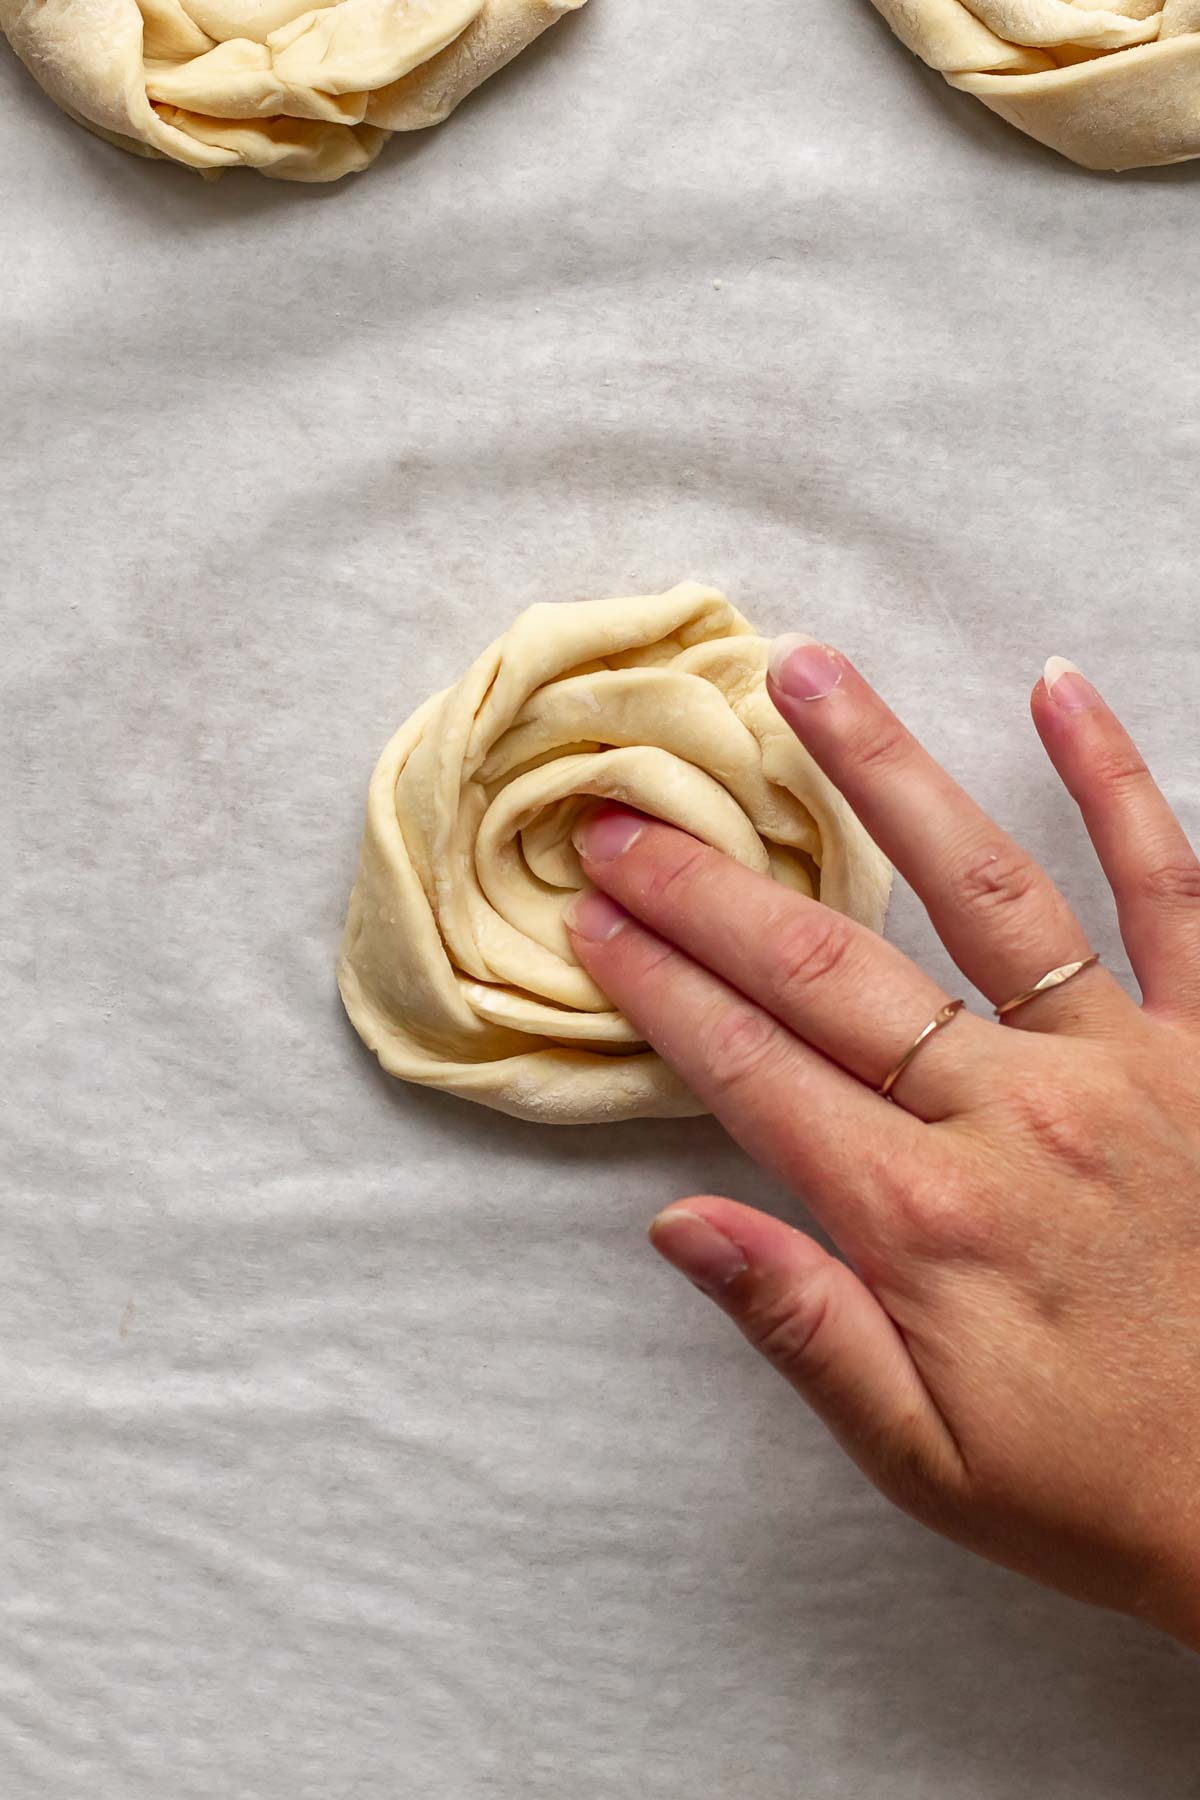 A hand presses down the middle of the puff pastry coil.